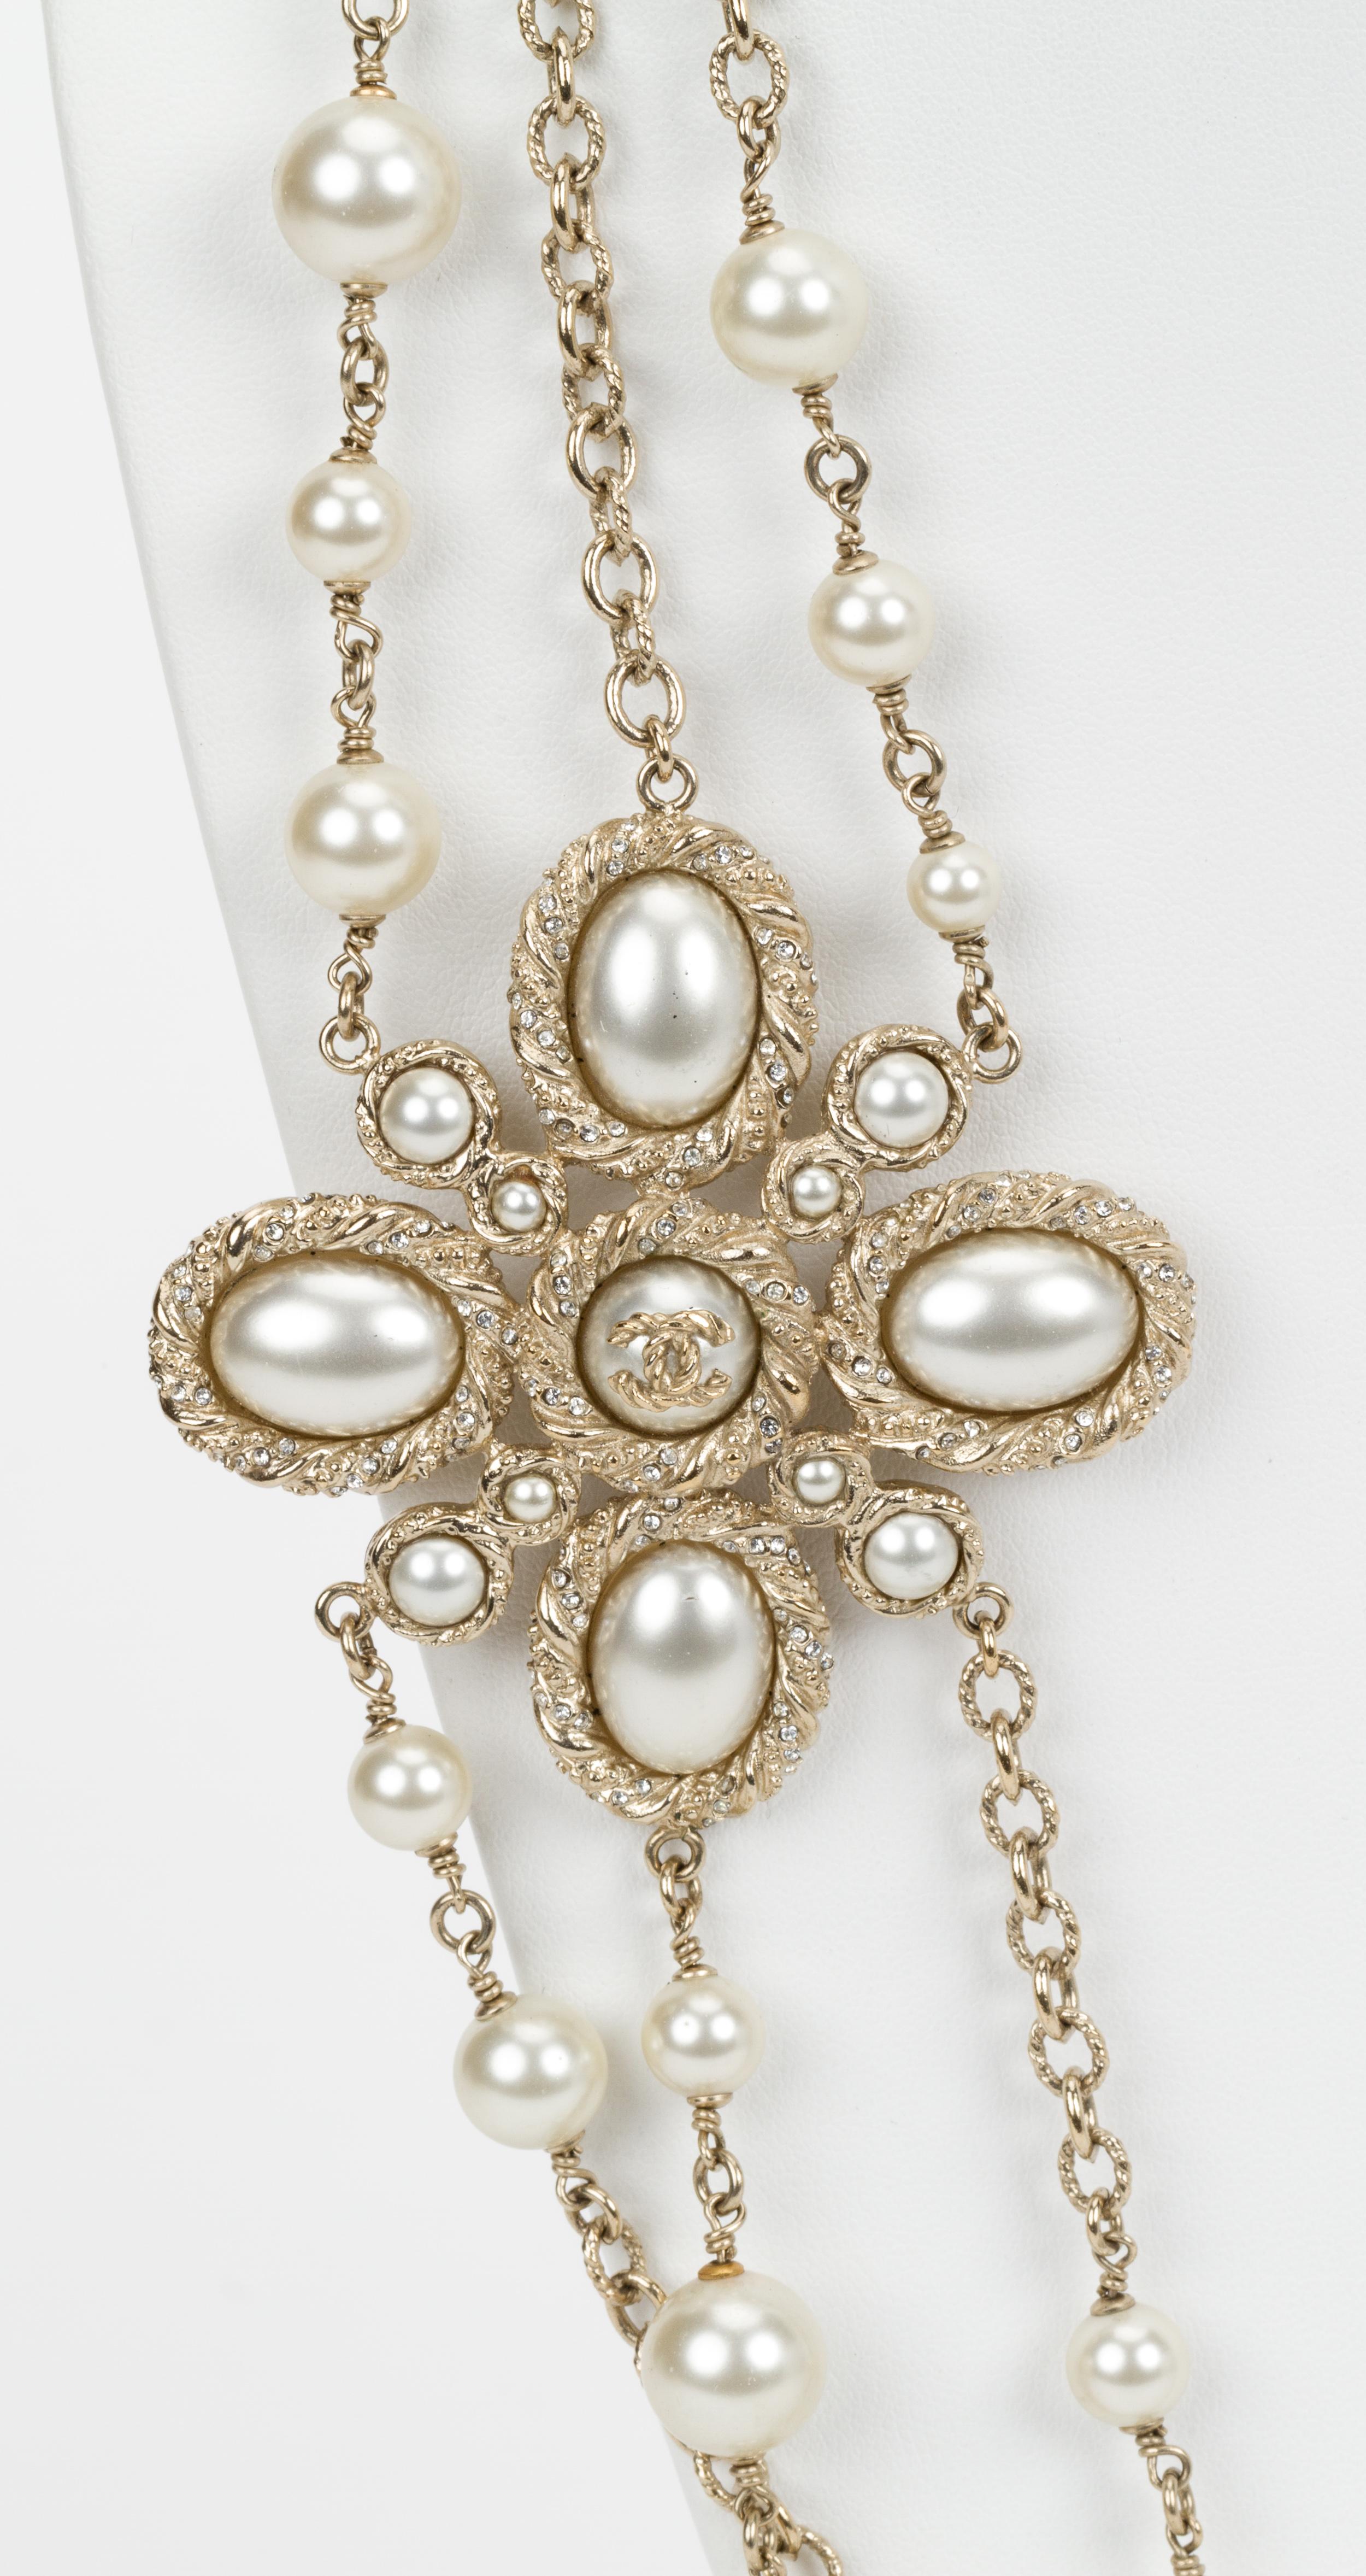 Chanel triple strand pearl necklace with side accent cross piece. Autumn 2013 collection. Comes with original box.